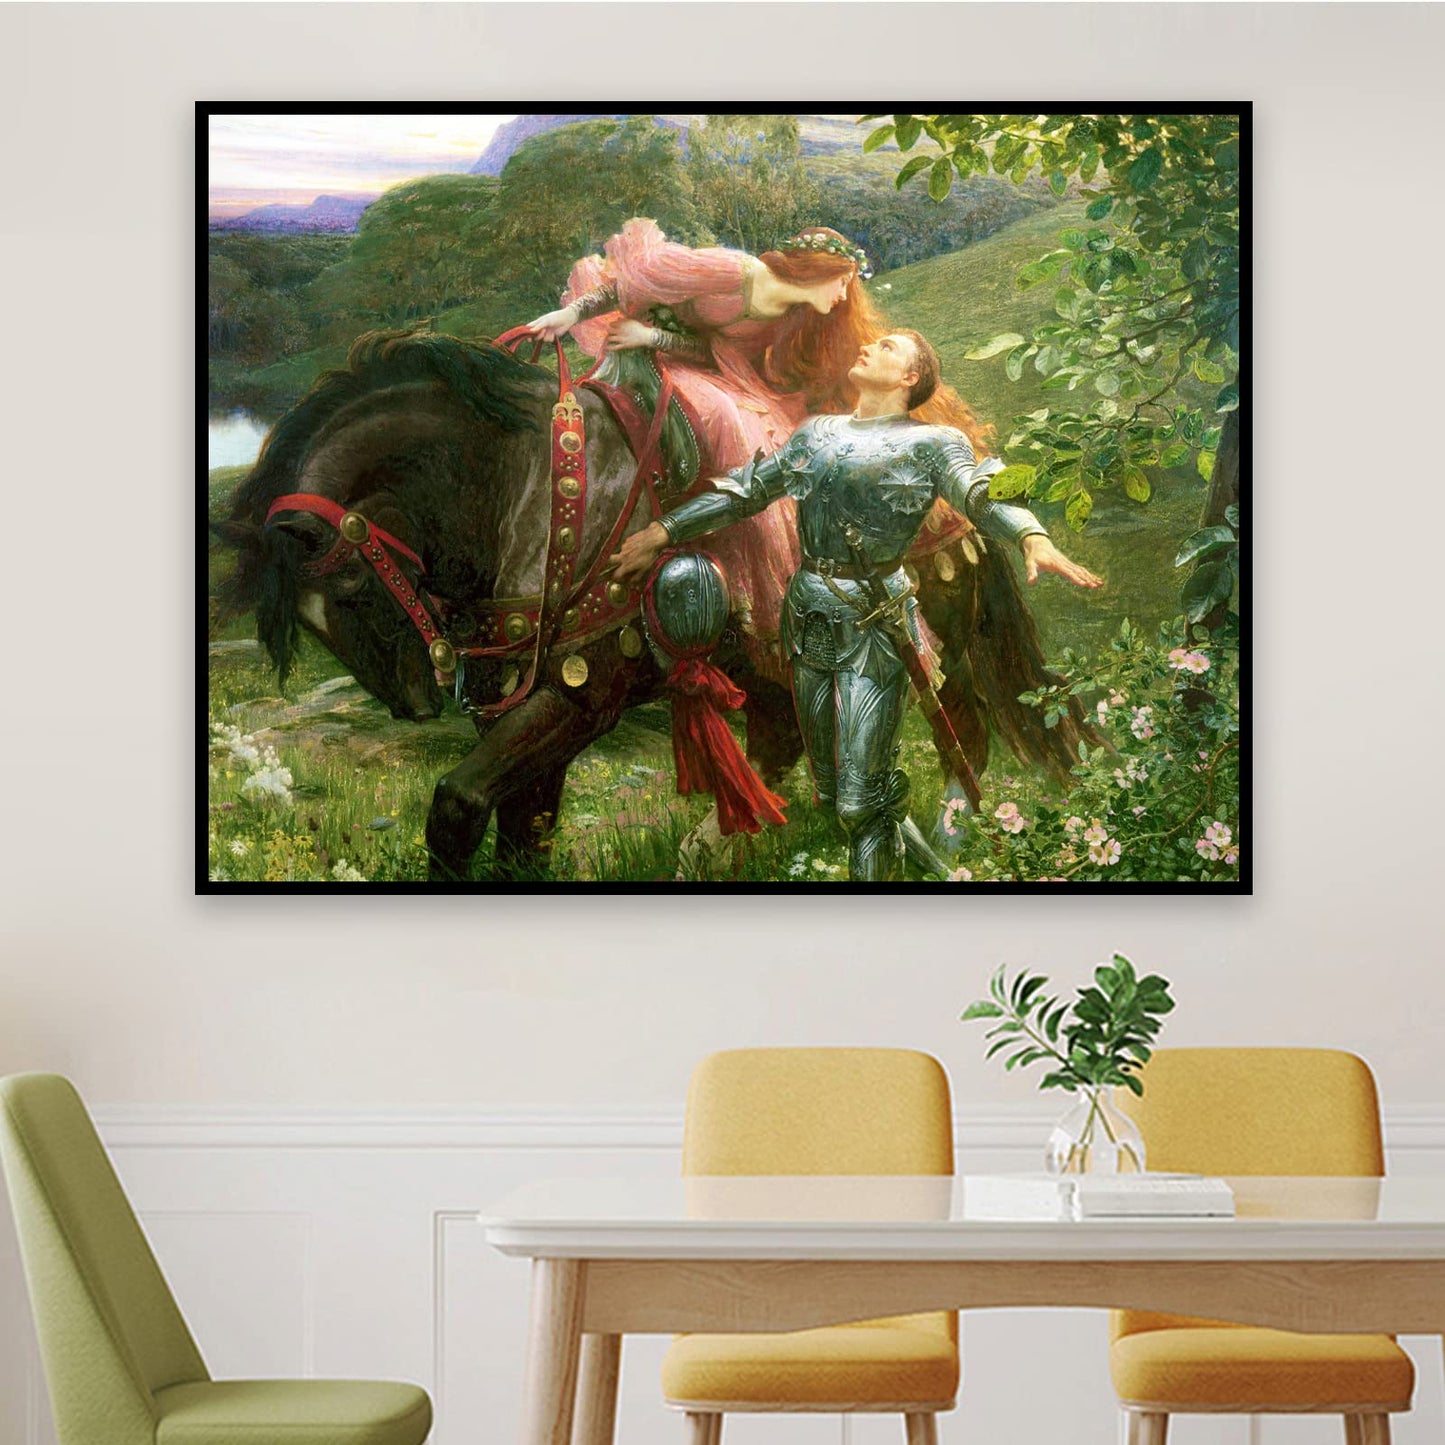 ZZPT La Belle Dame Sans Merci Poster - Frank Dicksee Prints - Famous Painting Reproduction - Modern Canvas Wall Art Pictures for Bedroom Living Room Home Decor Unframed (9x12in/23x30cm)